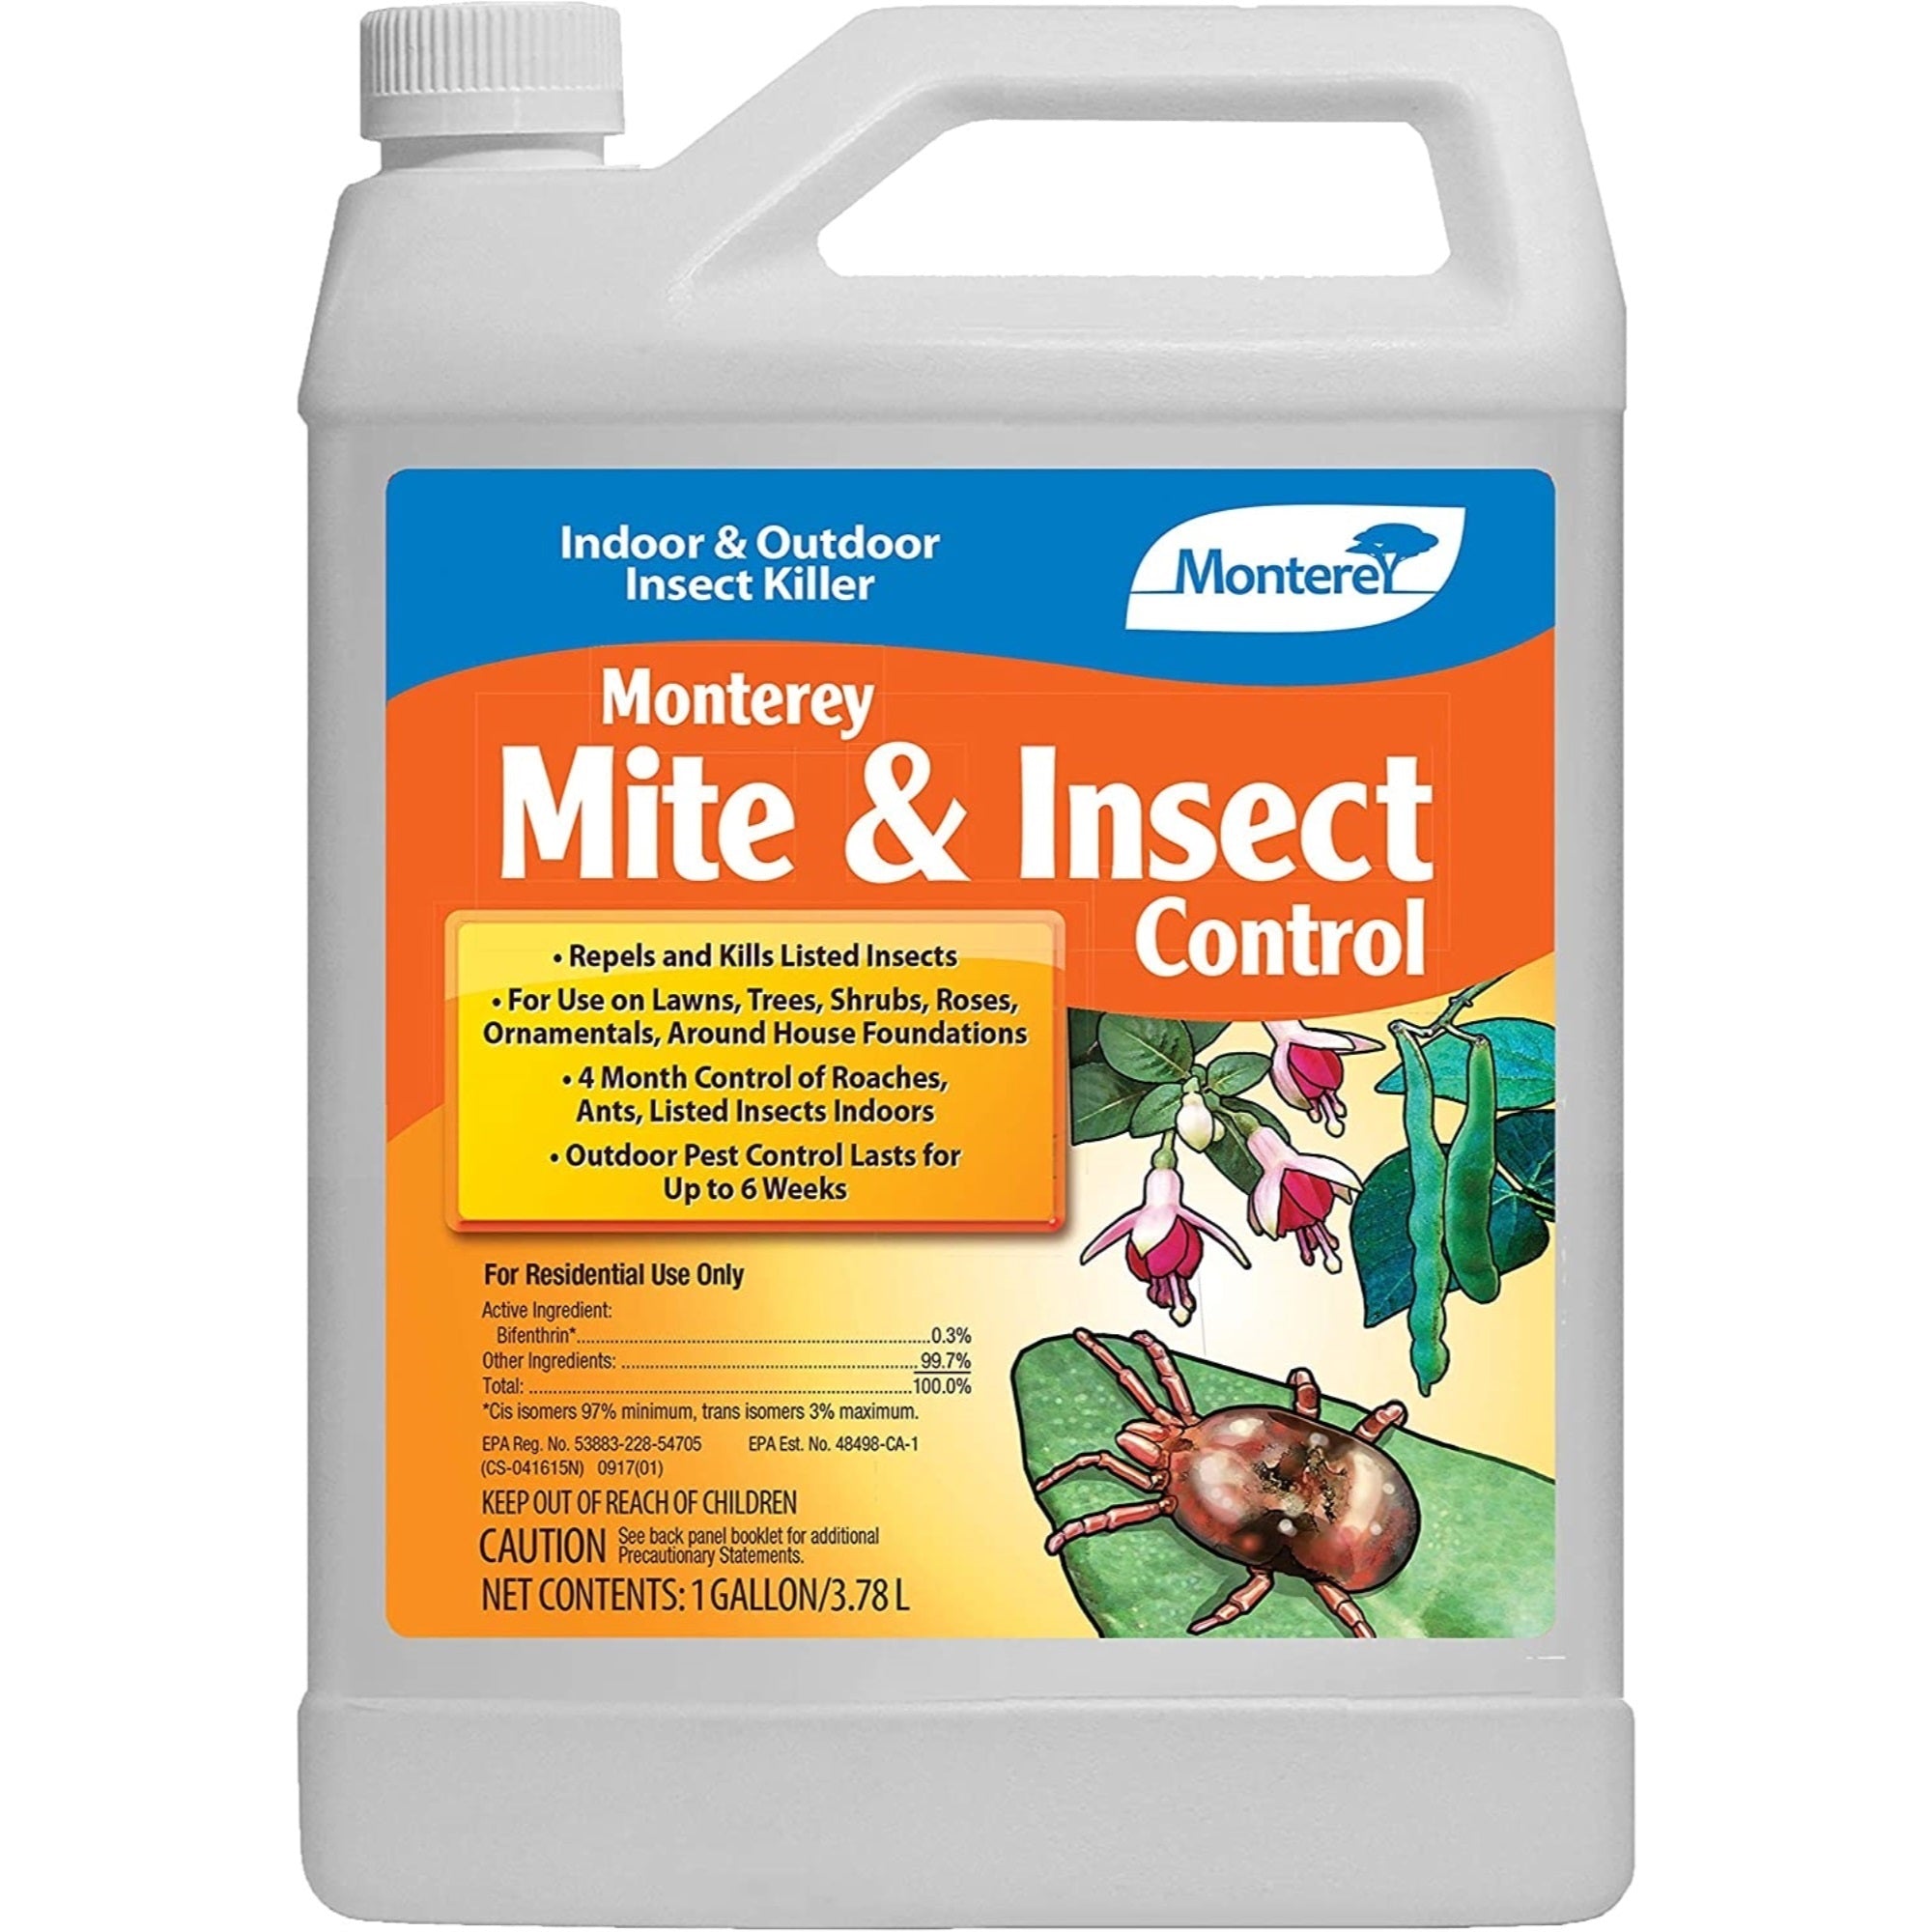 Monterey LG6228 Mite & Insect Control Insect Spray, 1 Gallon